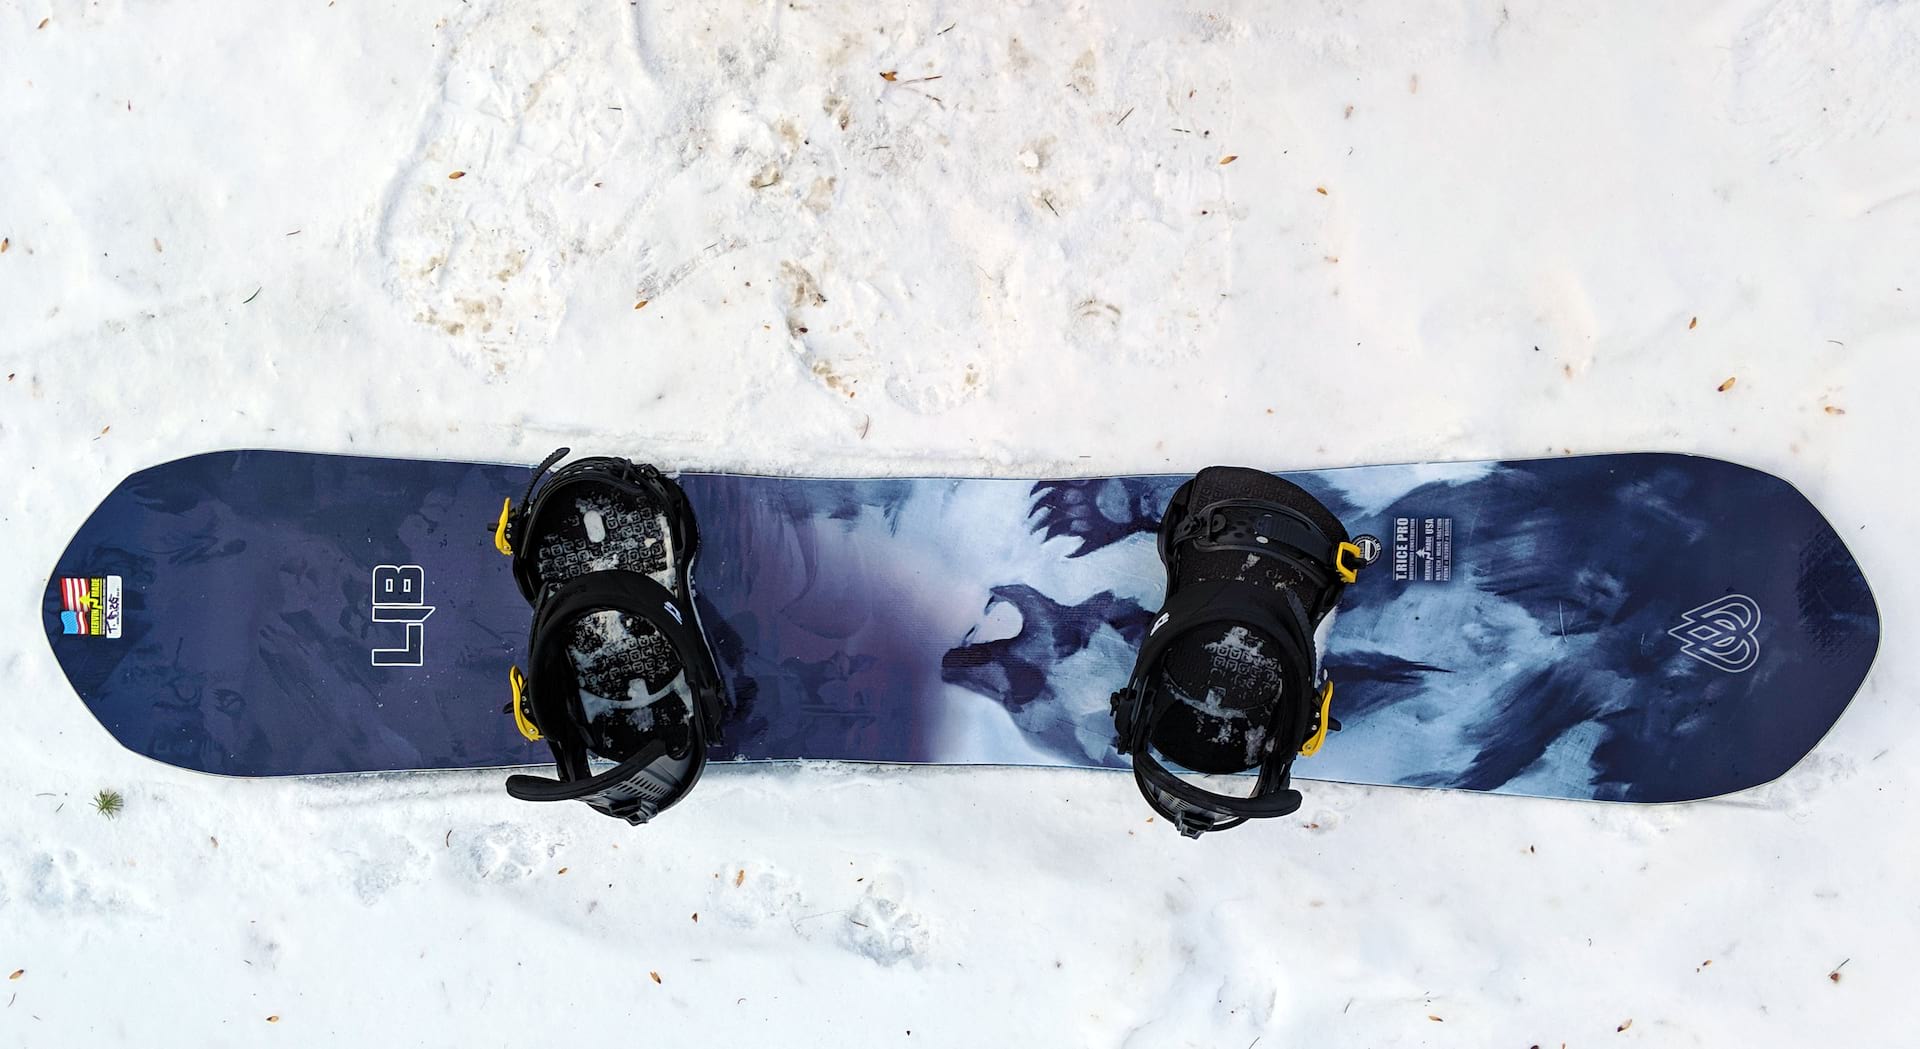 Video Review: A First Ride Look At The Lib Tech T.Rice HP Snowboard